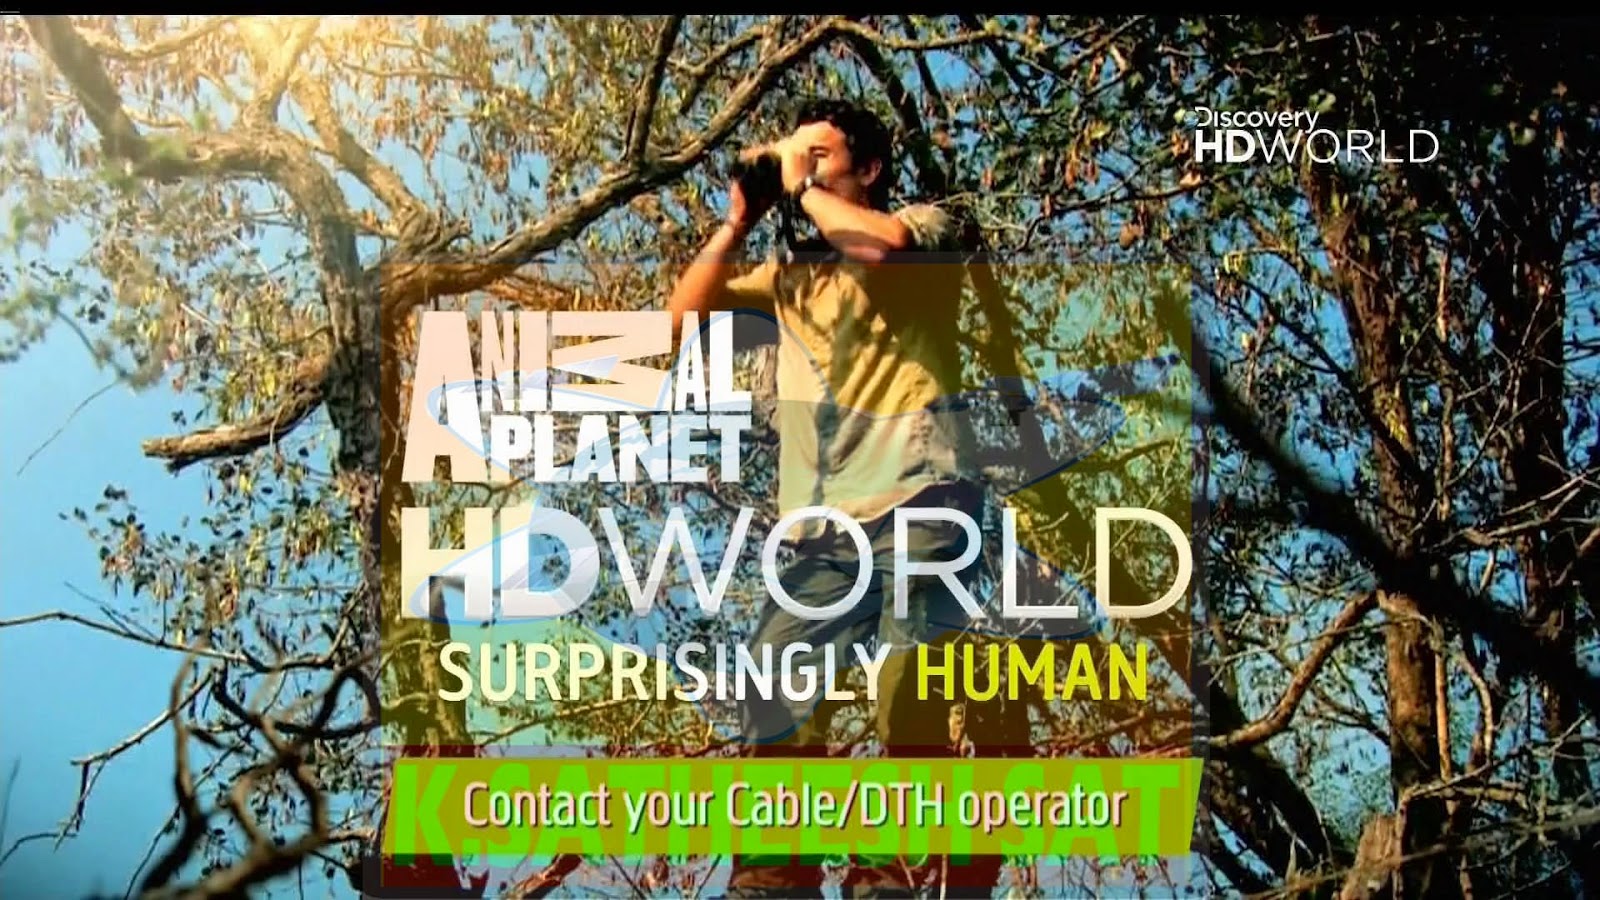  SAT ENGLISH: ANIMAL PLANET HD WORLD,TLC HD WORLD NEW HD CHANNEL'S  STARTED DISCOVERY FROM IS17@